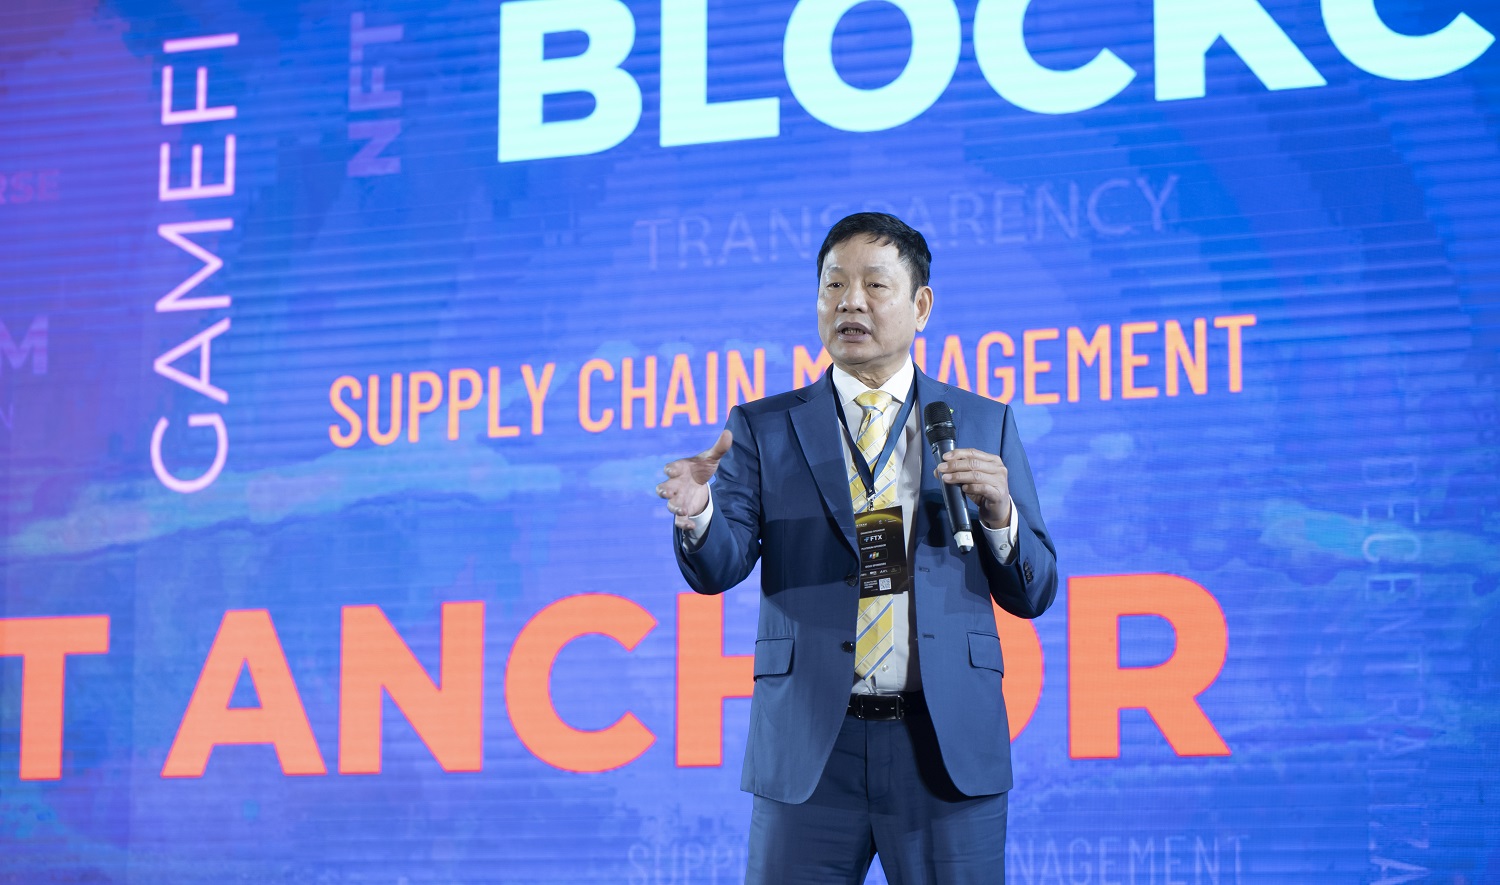 Mr. Truong Gia Binh - VINASA Founding Committee's Chairman and FPT Chairman - shared his Blockchain approach